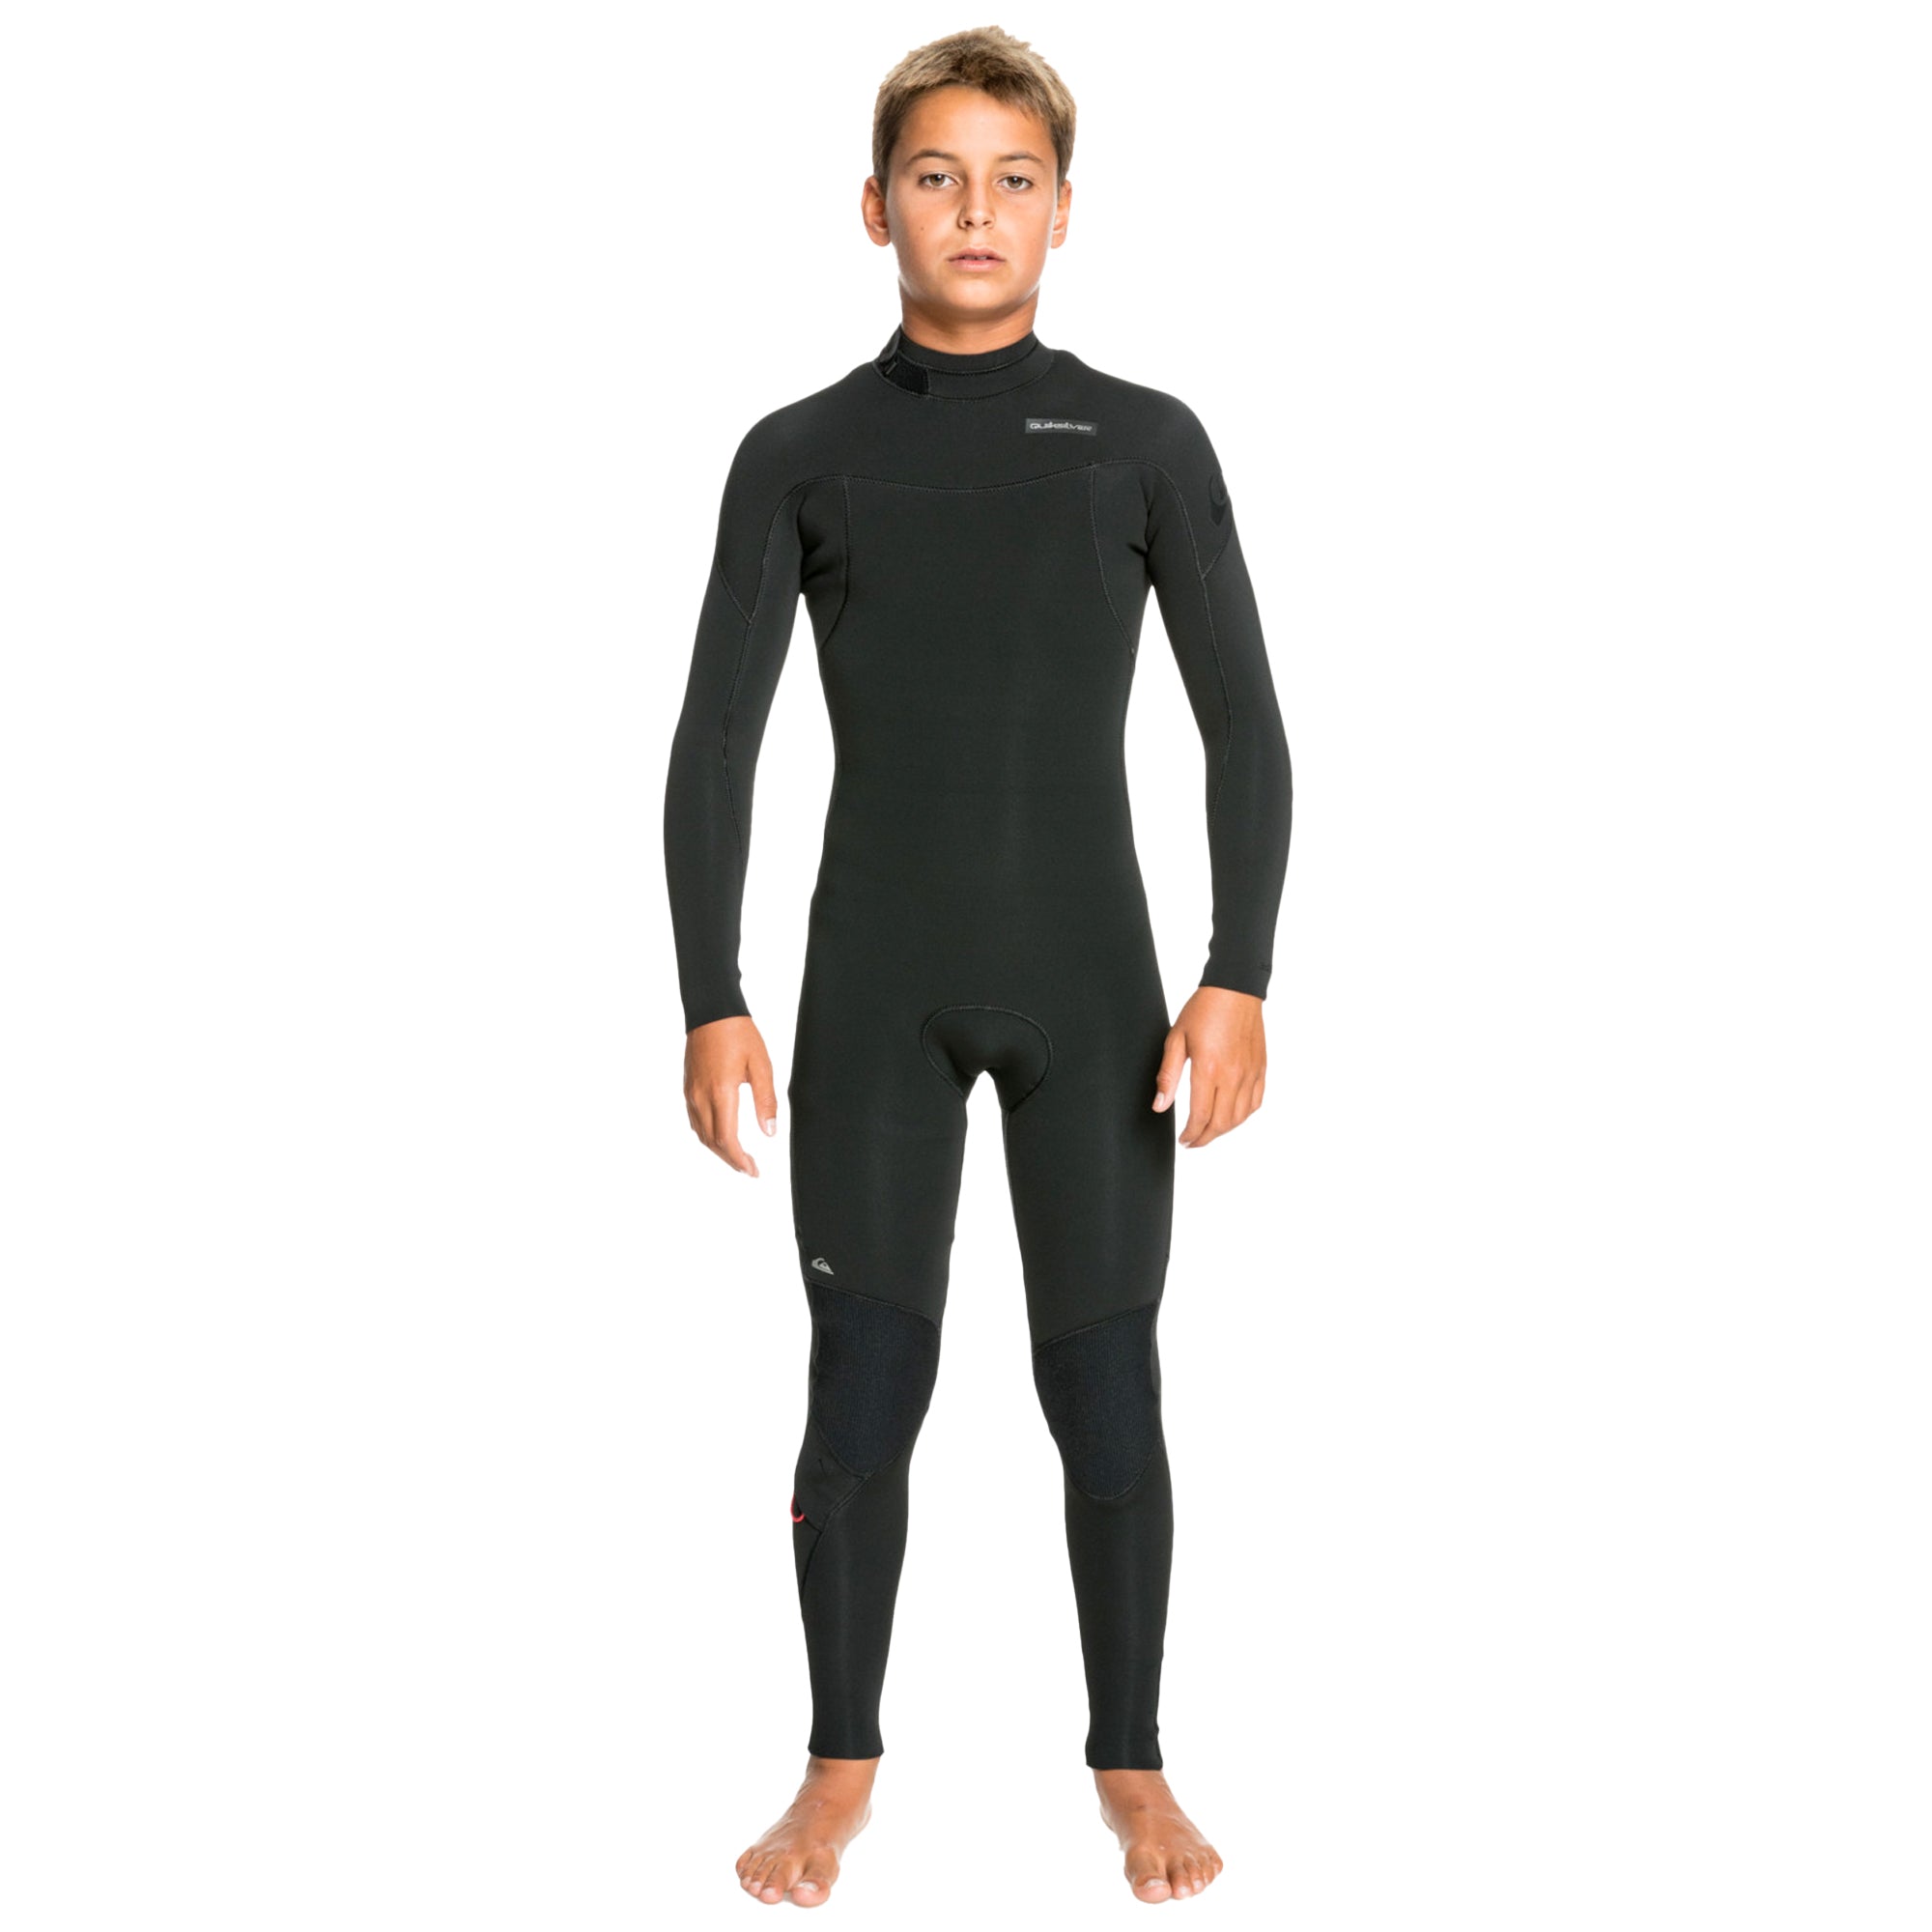 Quiksilver 3/2 Every Day Sessions Youth Boy's Back-Zip Wetsuit